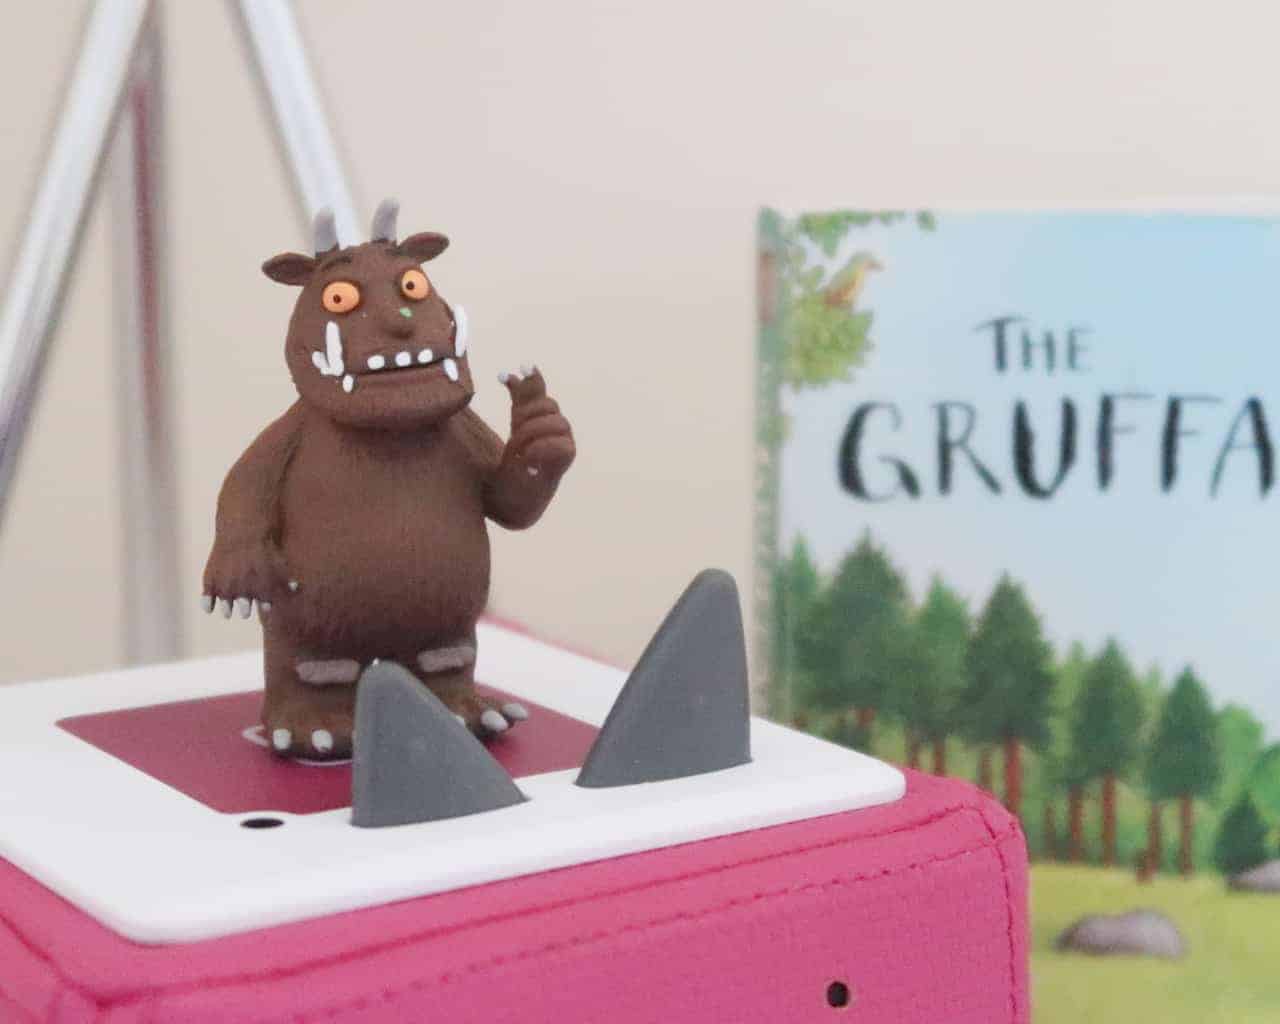 A Favorite for the Whole Family and a Giveaway: The Gruffalo